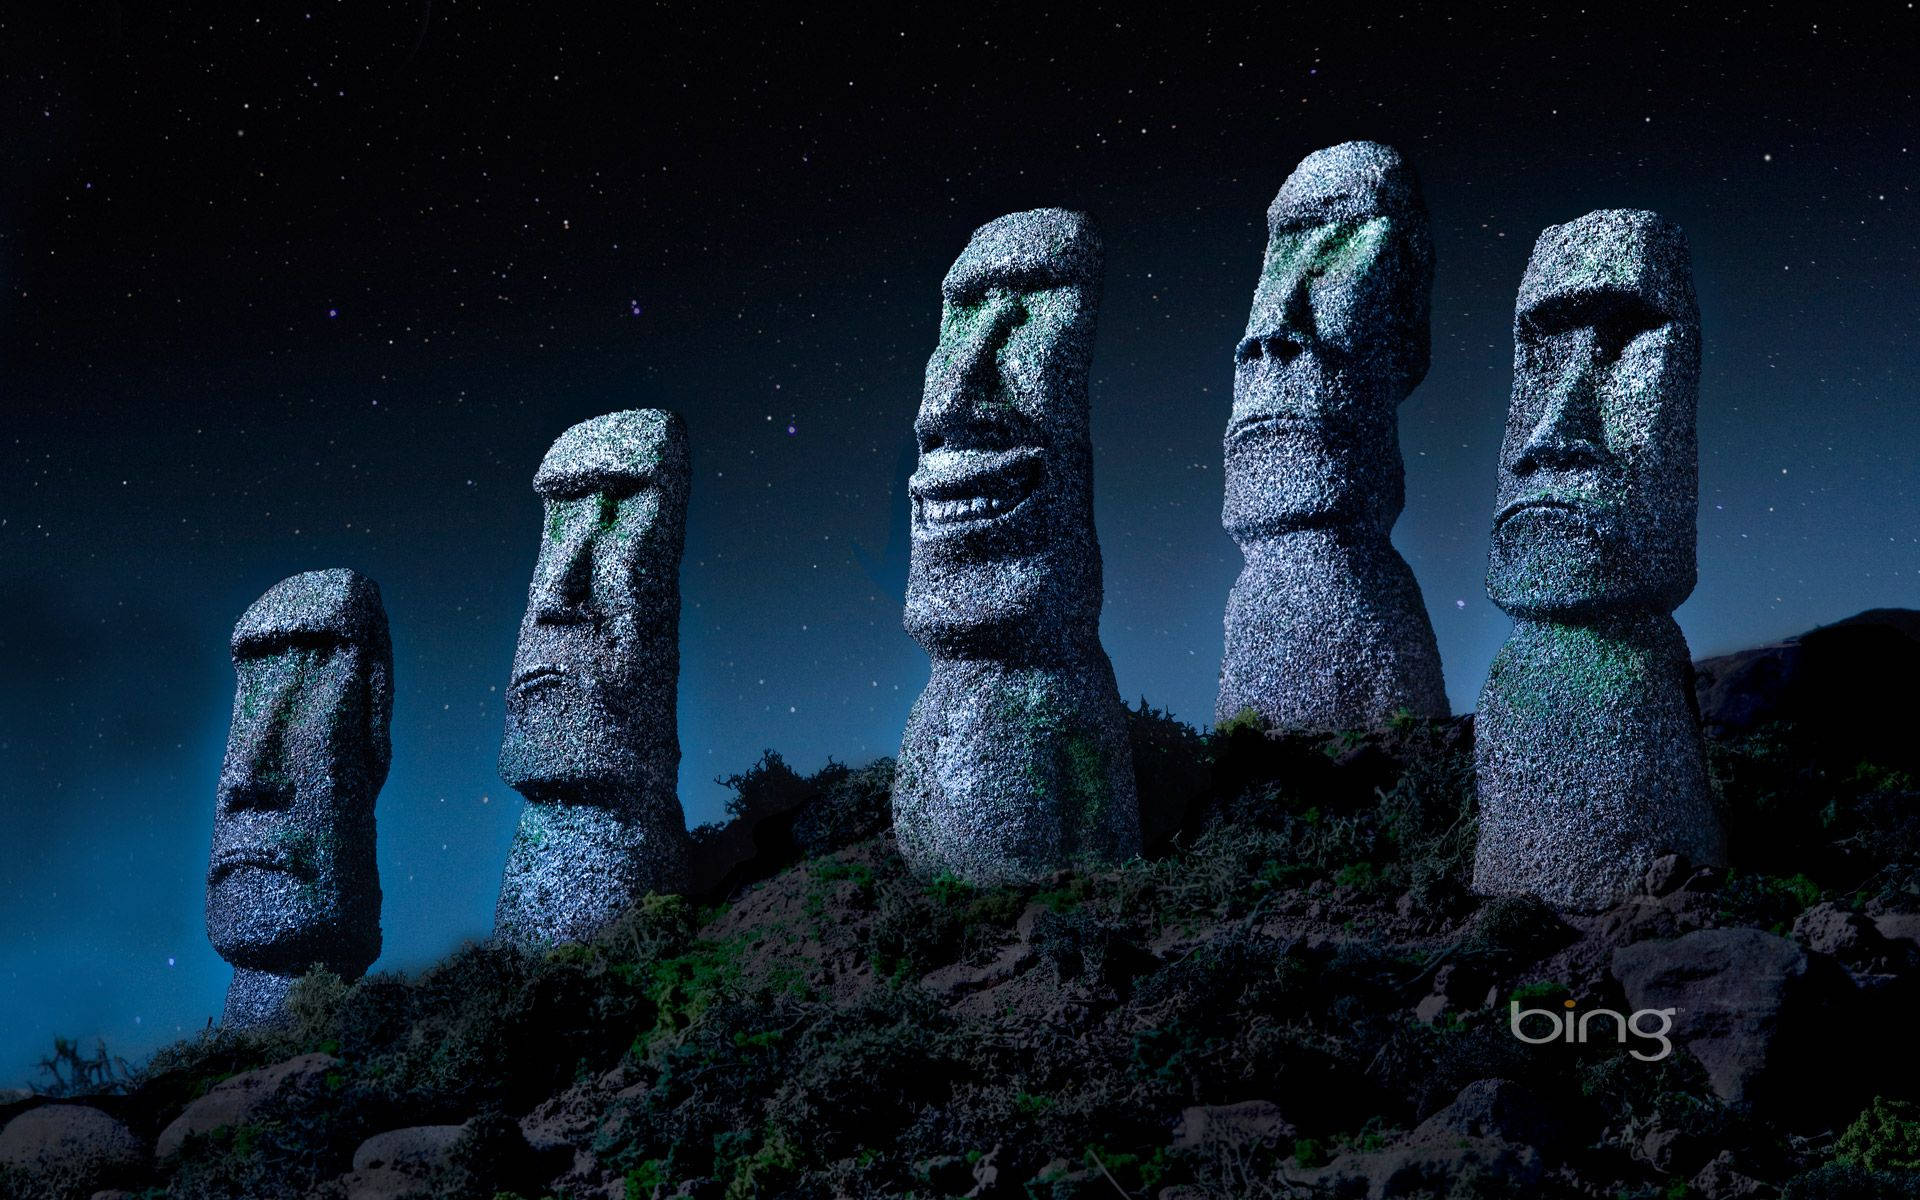 Stone Faces Bing Hd Cover Background